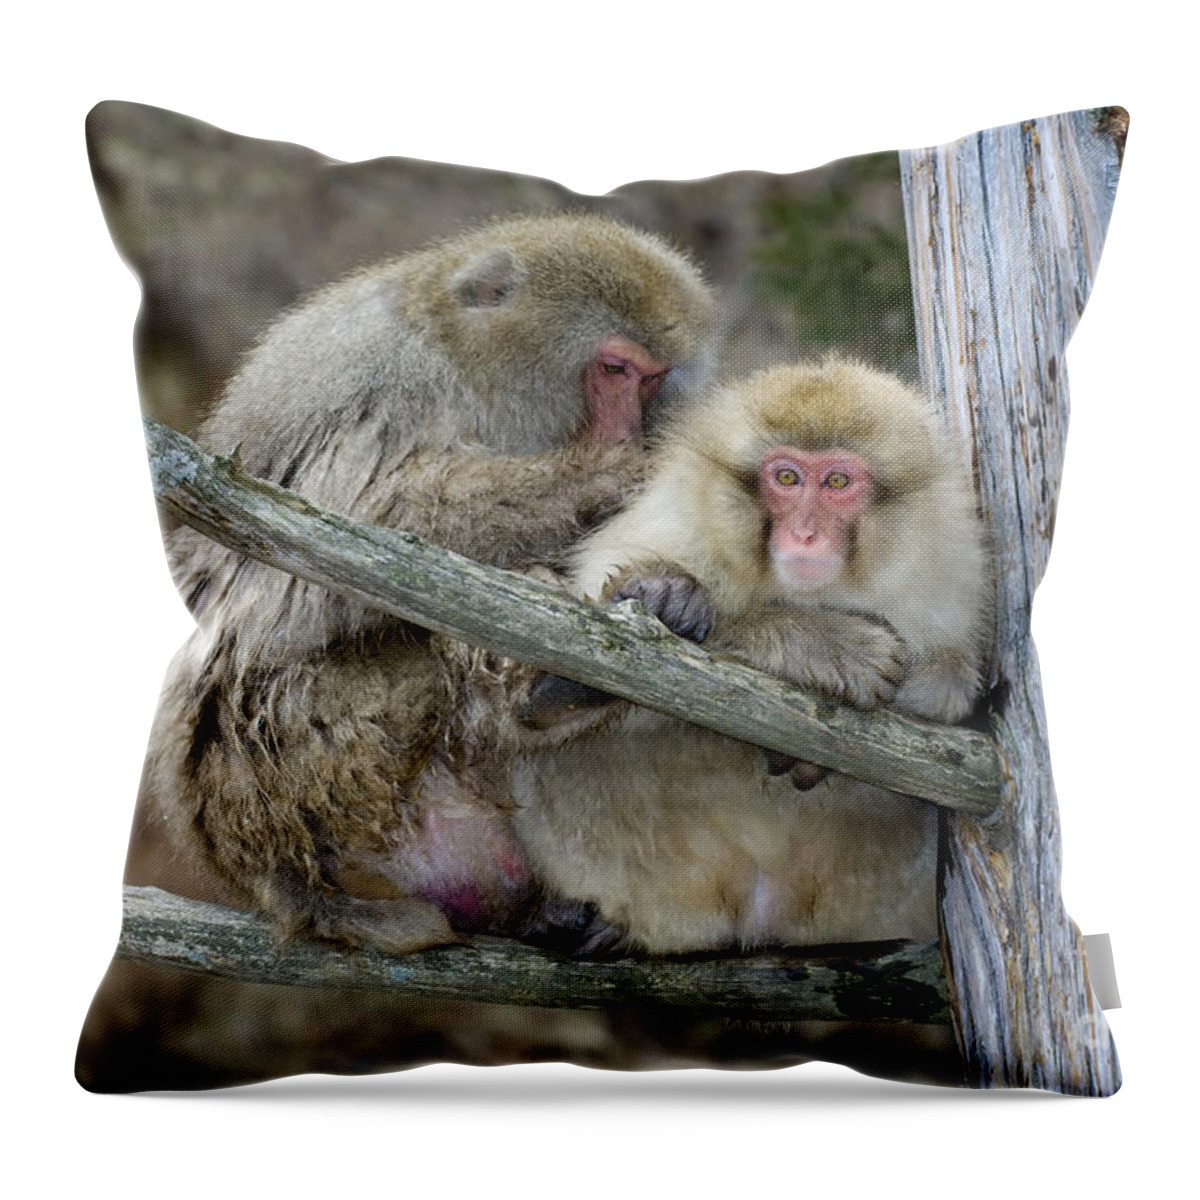 Japanese Macaque Throw Pillow featuring the photograph Japanese Macaques by John Shaw